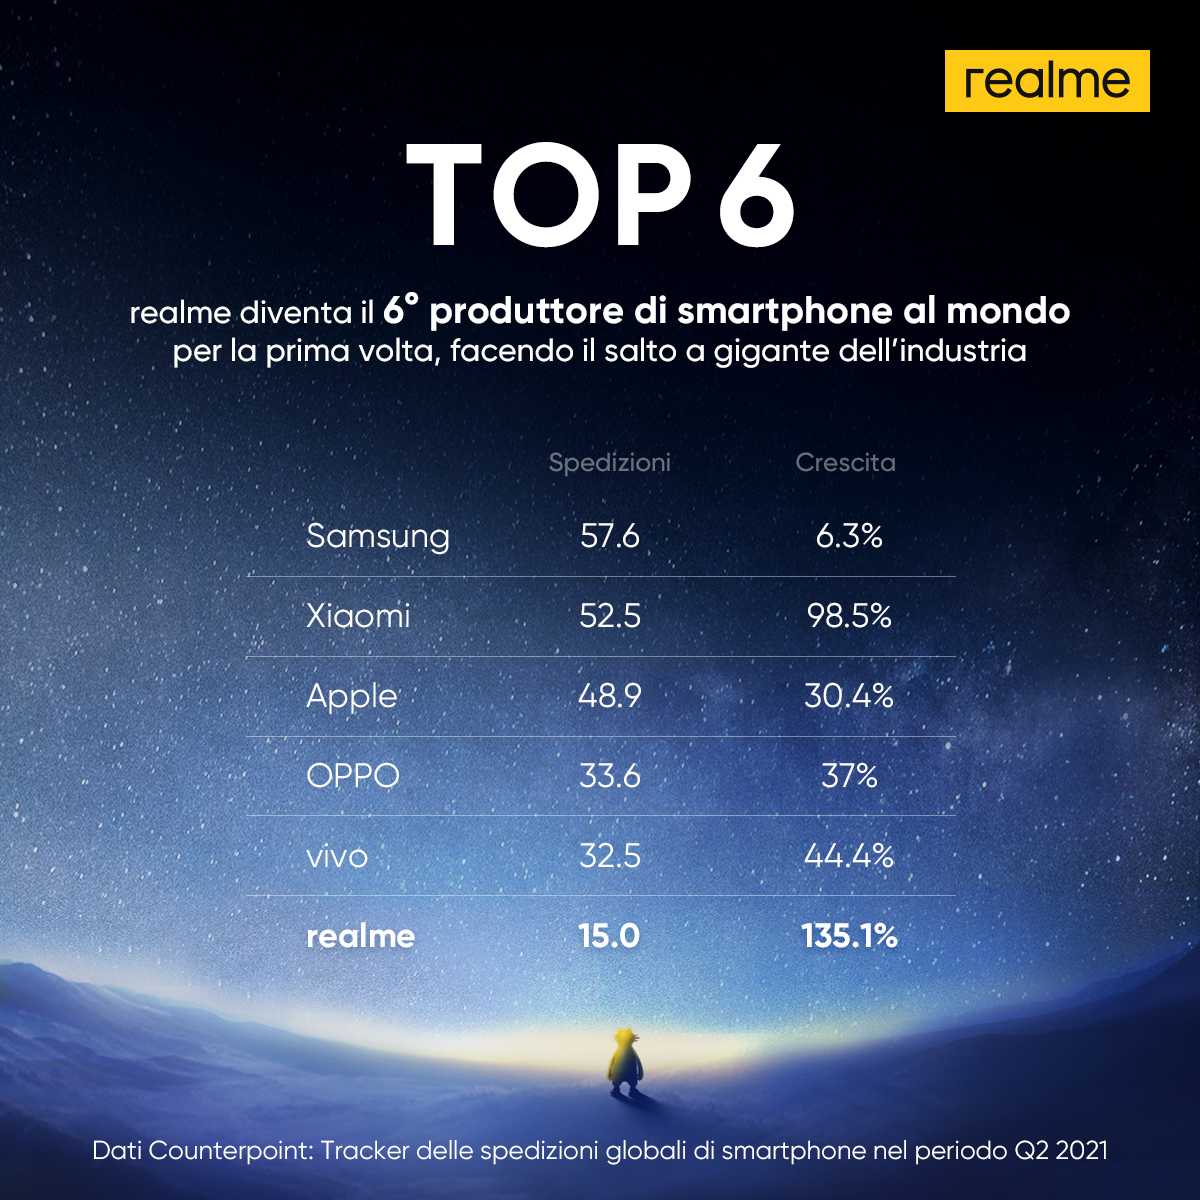 realme: ranks sixth in the global smartphone ranking